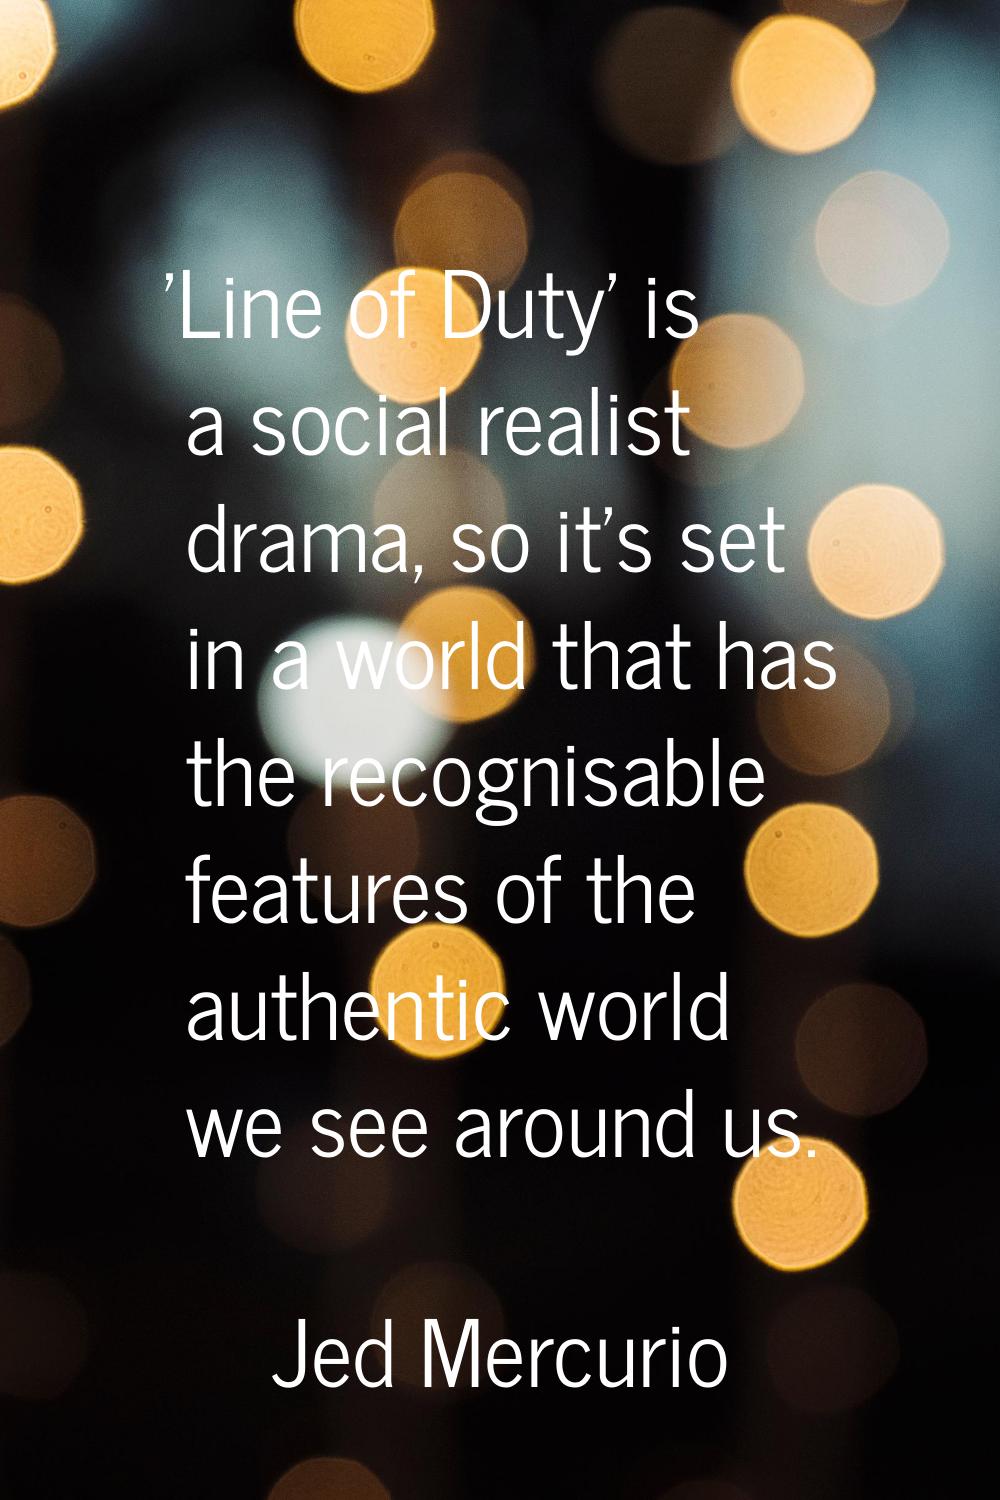 'Line of Duty' is a social realist drama, so it's set in a world that has the recognisable features